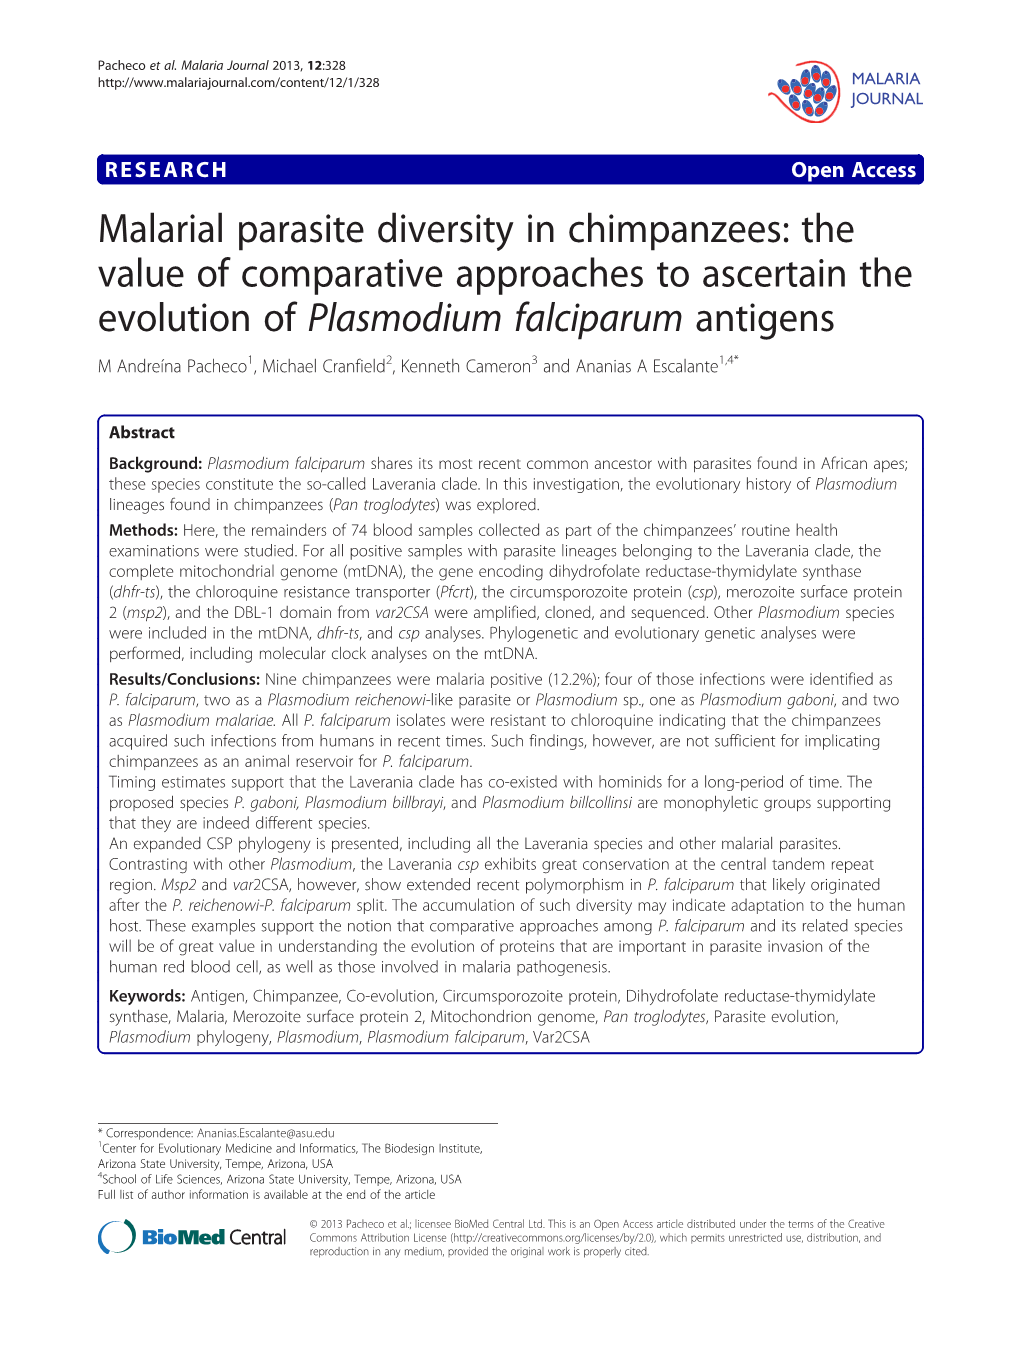 Malarial Parasite Diversity in Chimpanzees: the Value of Comparative Approaches to Ascertain the Evolution of Plasmodium Falcipa